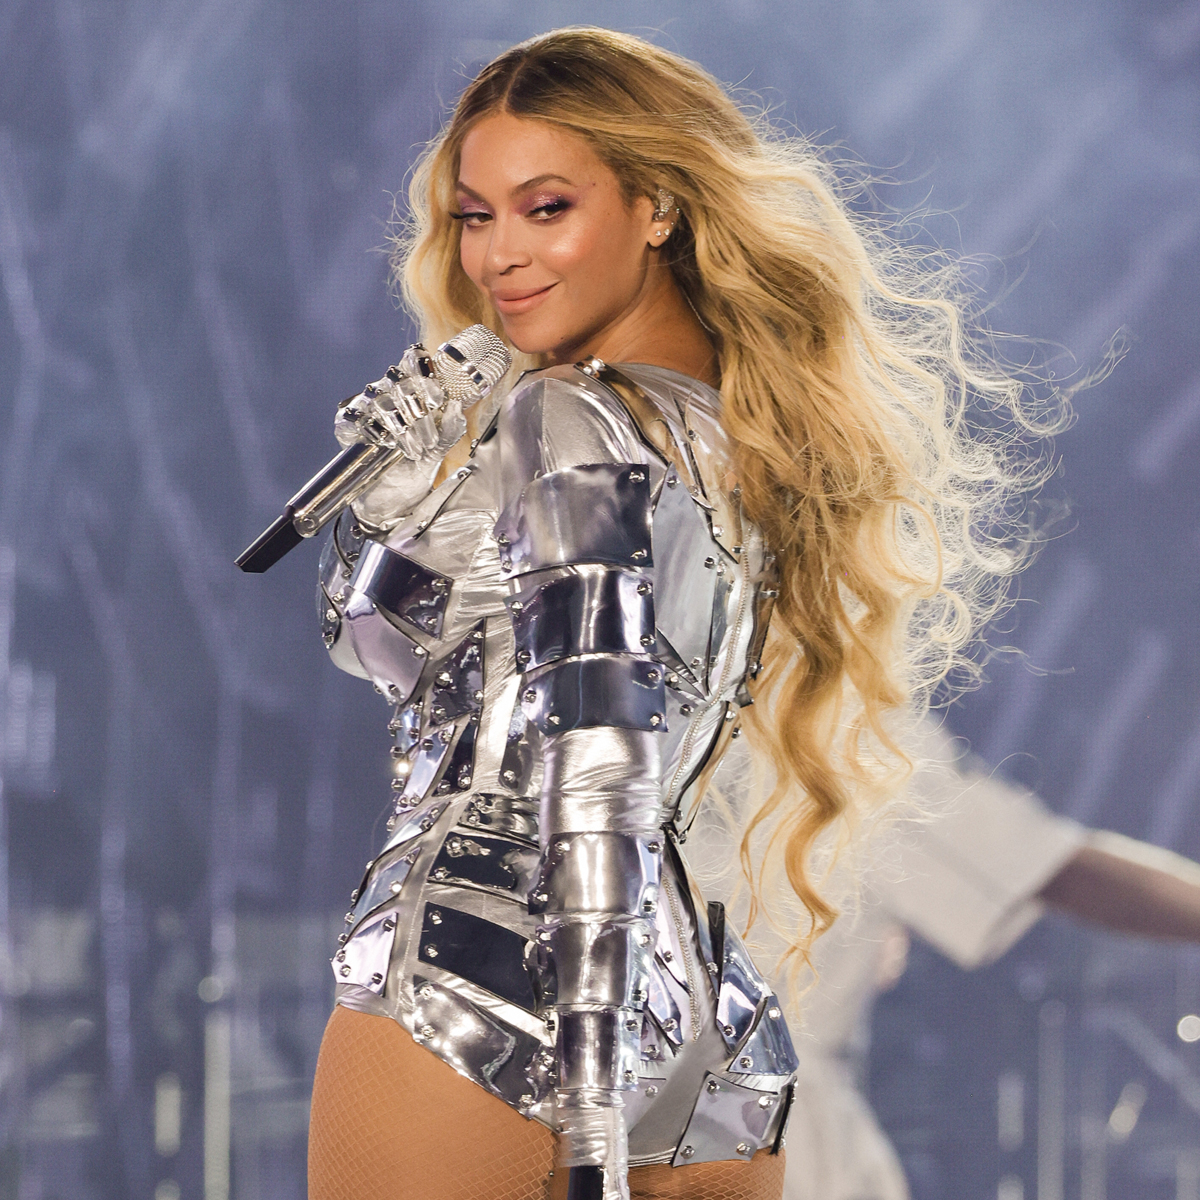 Why Beyoncé Just Canceled an Upcoming Stop on Her Renaissance Tour